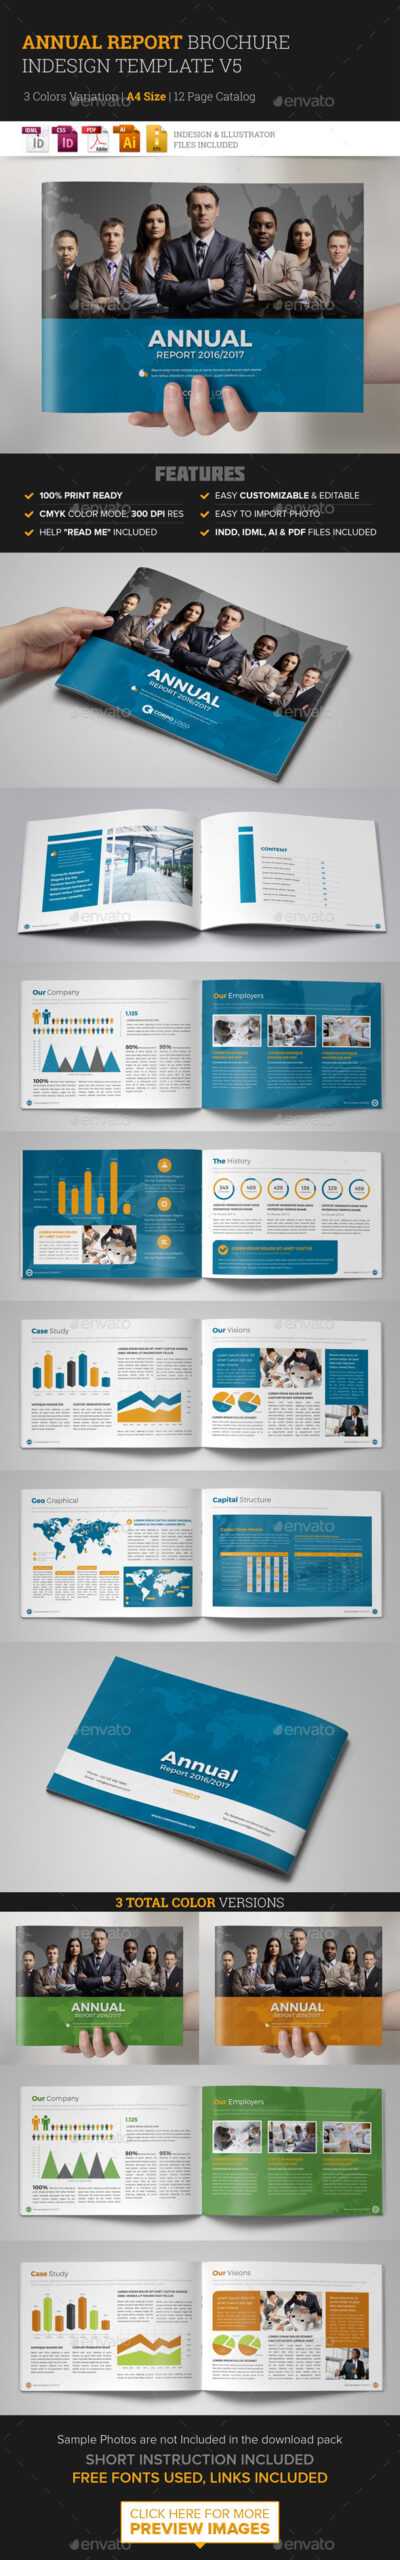 Annual Report Template Indesign Graphics, Designs & Templates Intended For Free Annual Report Template Indesign